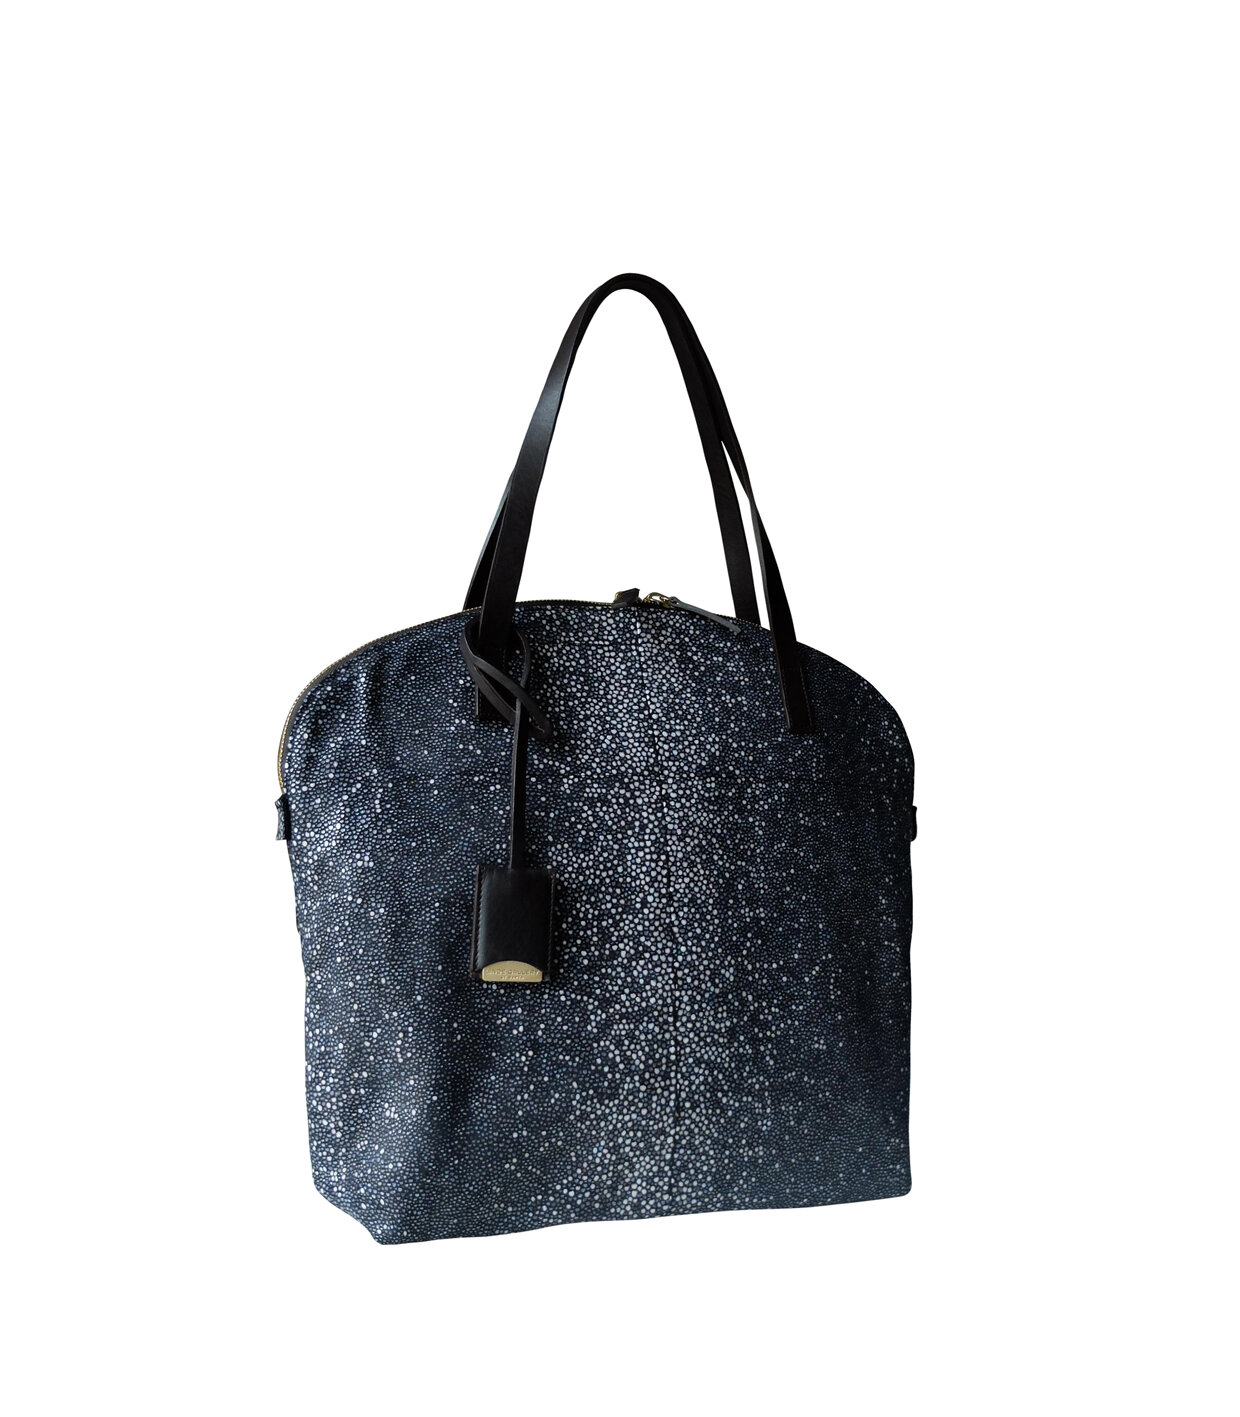 FLAMANDS S - GALUCHAT, PRINTED SUEDE - BLACK — Linde Gallery St-Barth